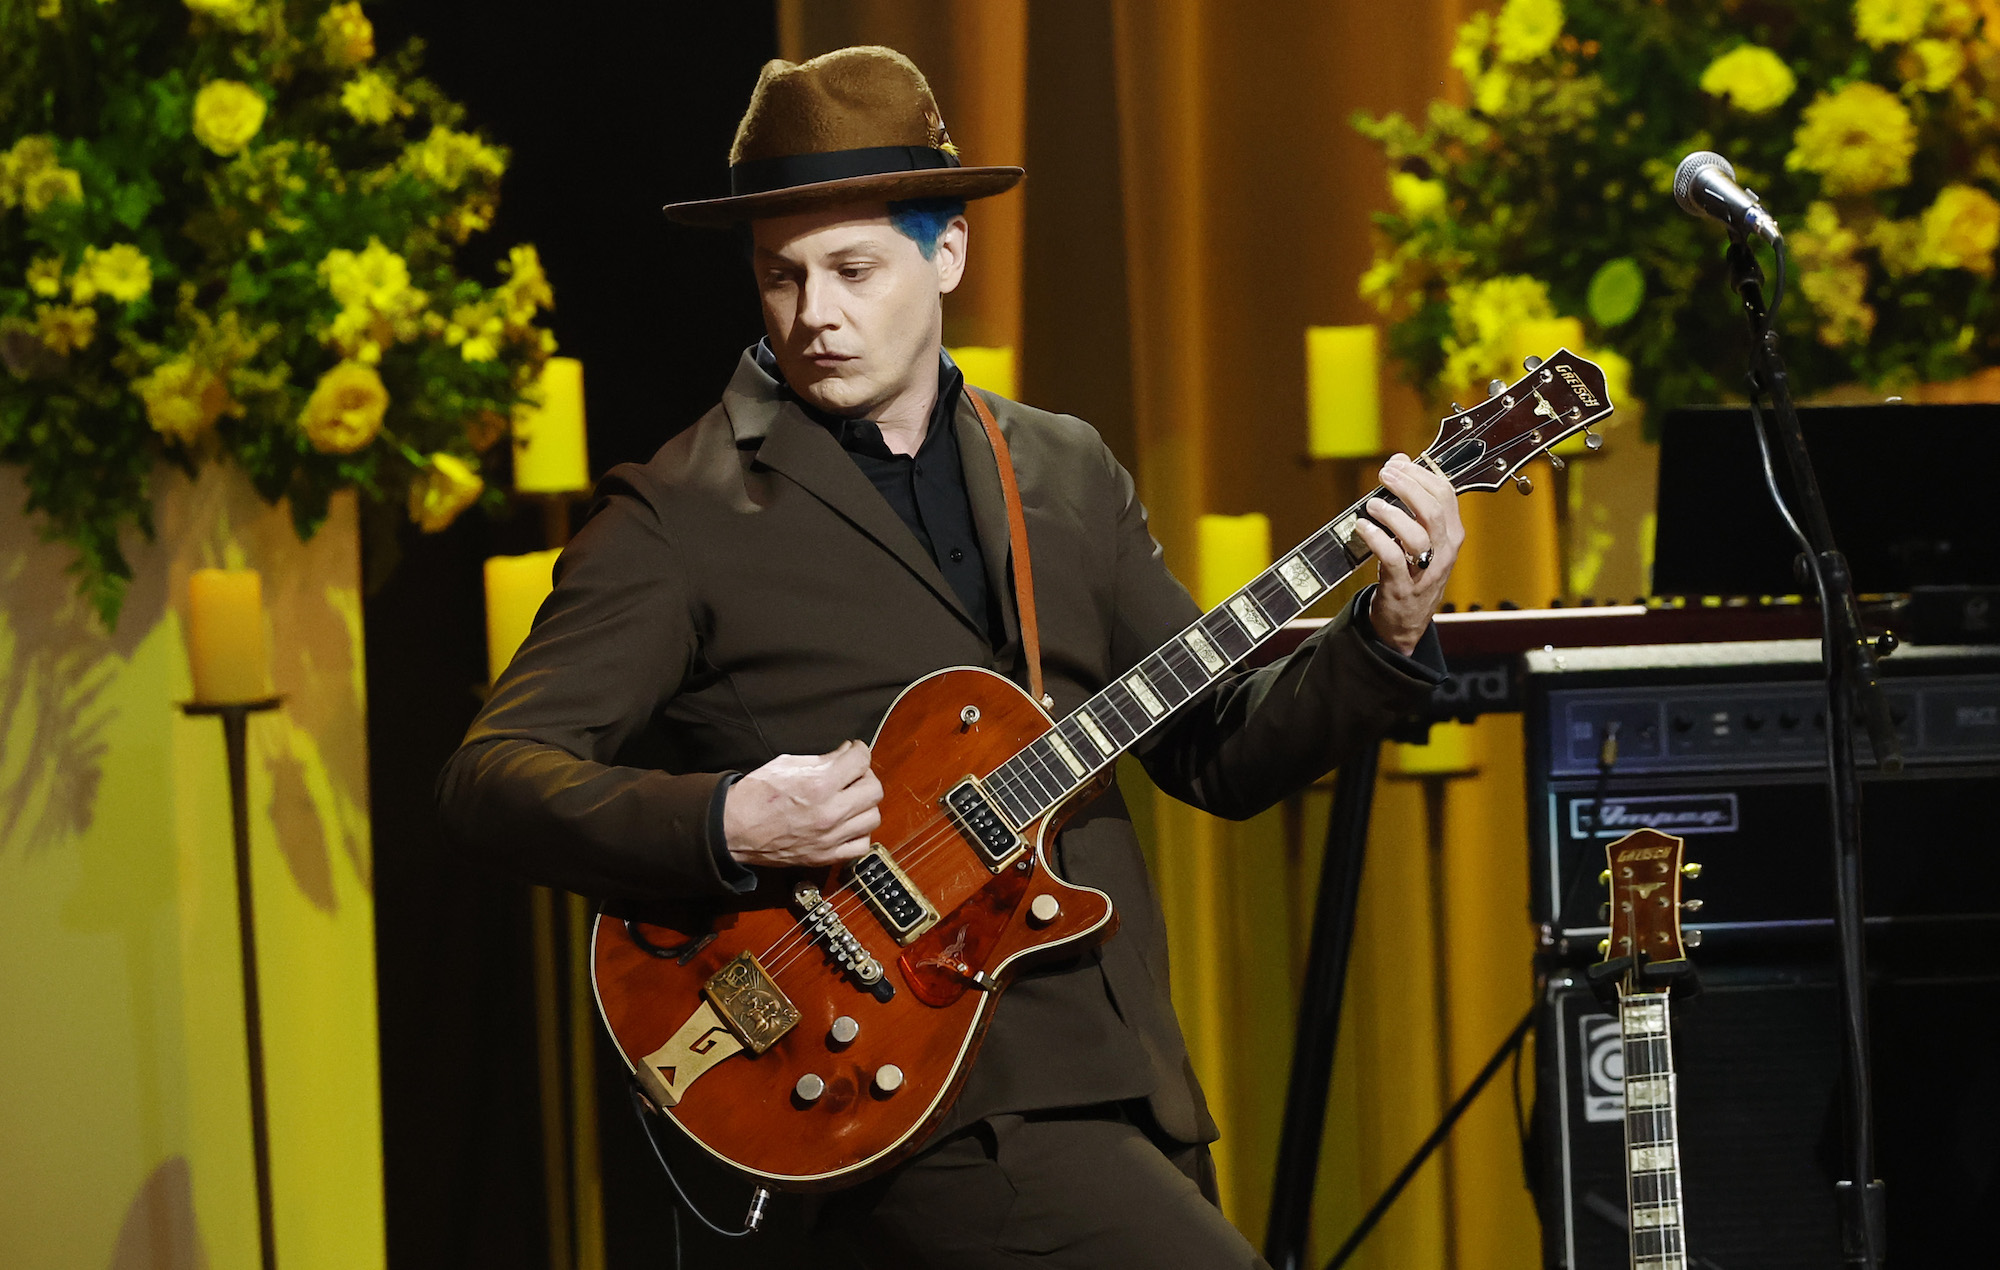 Jack White to appear in Martin Scorsese's new film 'Killers Of The